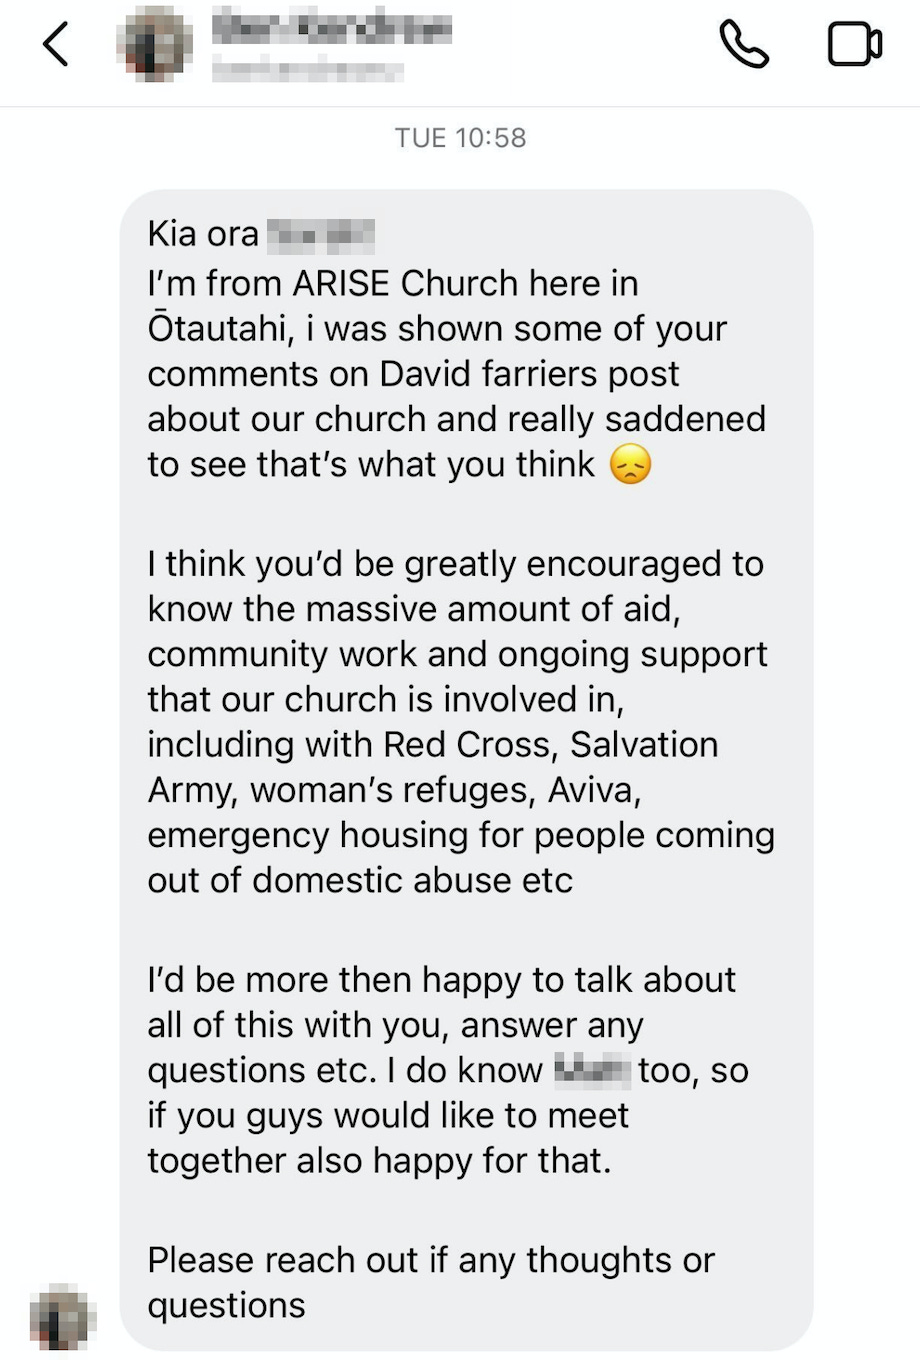 "Kia ora — I’m from Arise church here in Otautahi — I was shown some of your comments on David Farrier’s post about our church and really saddened to see that’s what you think *sad face emoji*  I think you’d be greatly encouraged to know the massive amount of aid, community work and ongoing support that our church is involved in….”